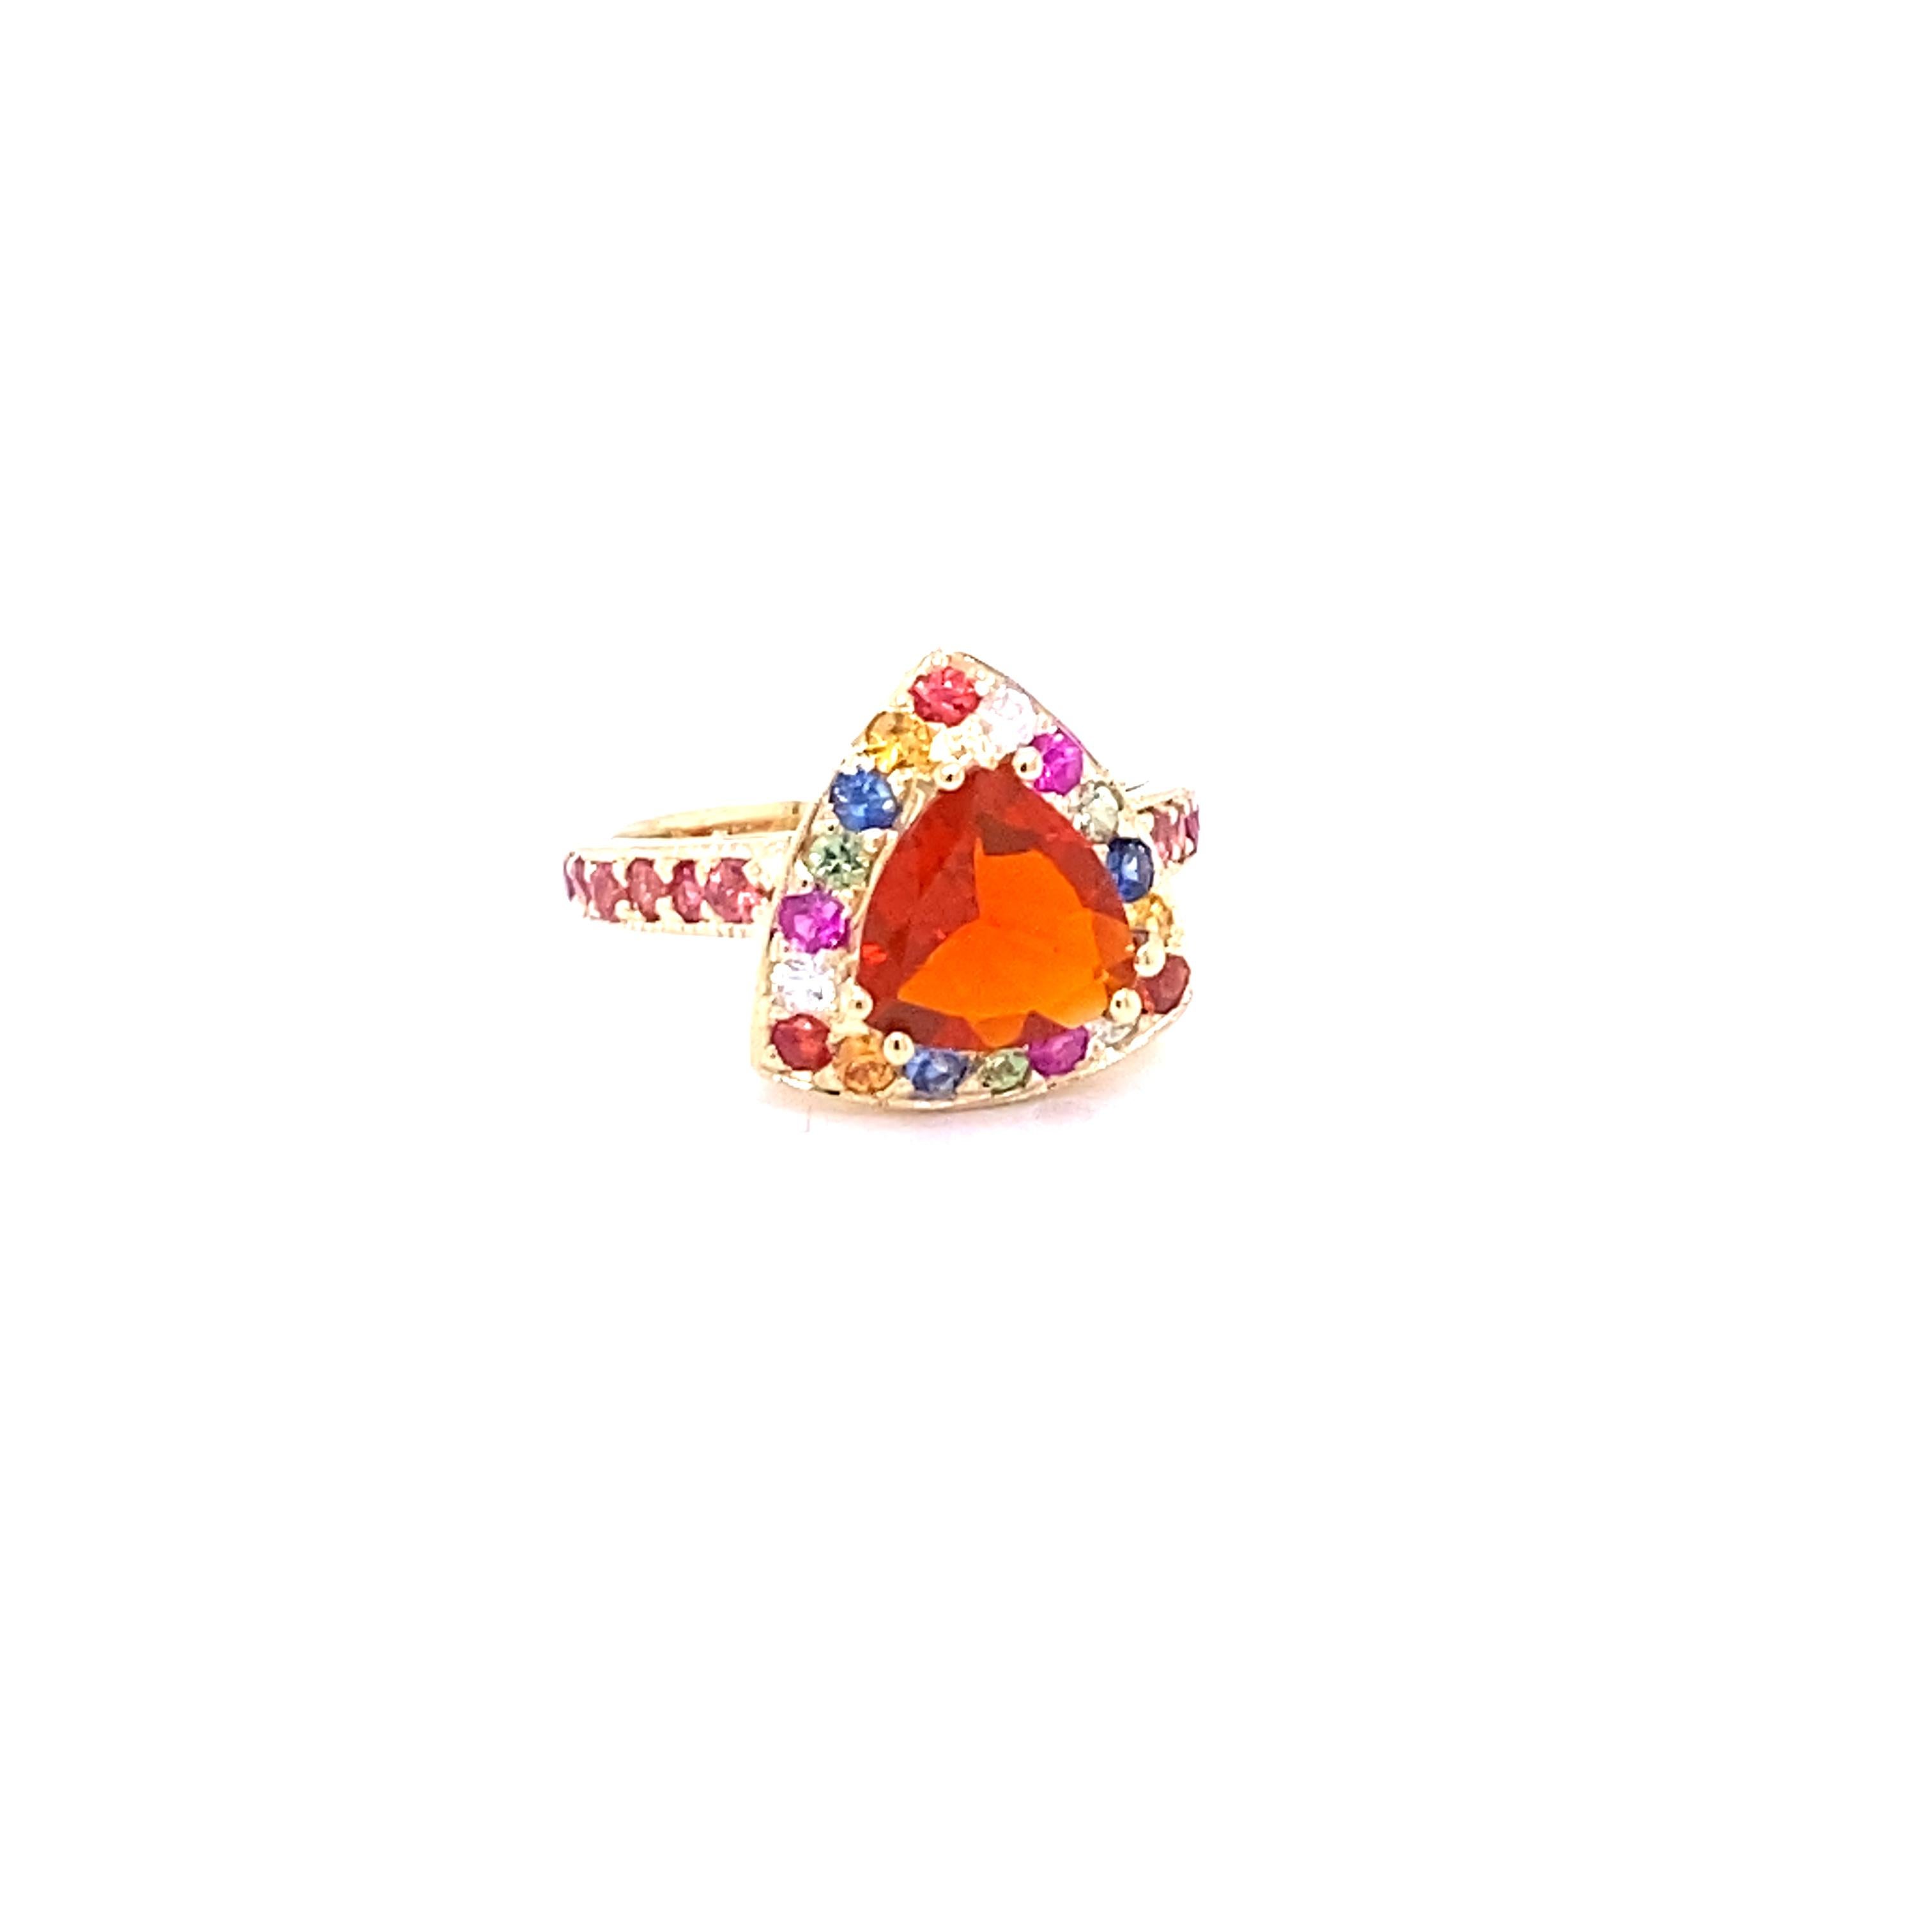 This Ring has a 1.35 Carat  Trillion Cut Fire Opal as its center stone and is beautifully surrounded by 30 Multi-Colored Sapphires that weigh 1.33 Carats.
The Total Carat Weight of this ring is 2.68 Carats. 
This Ring is casted in 14K Yellow Gold